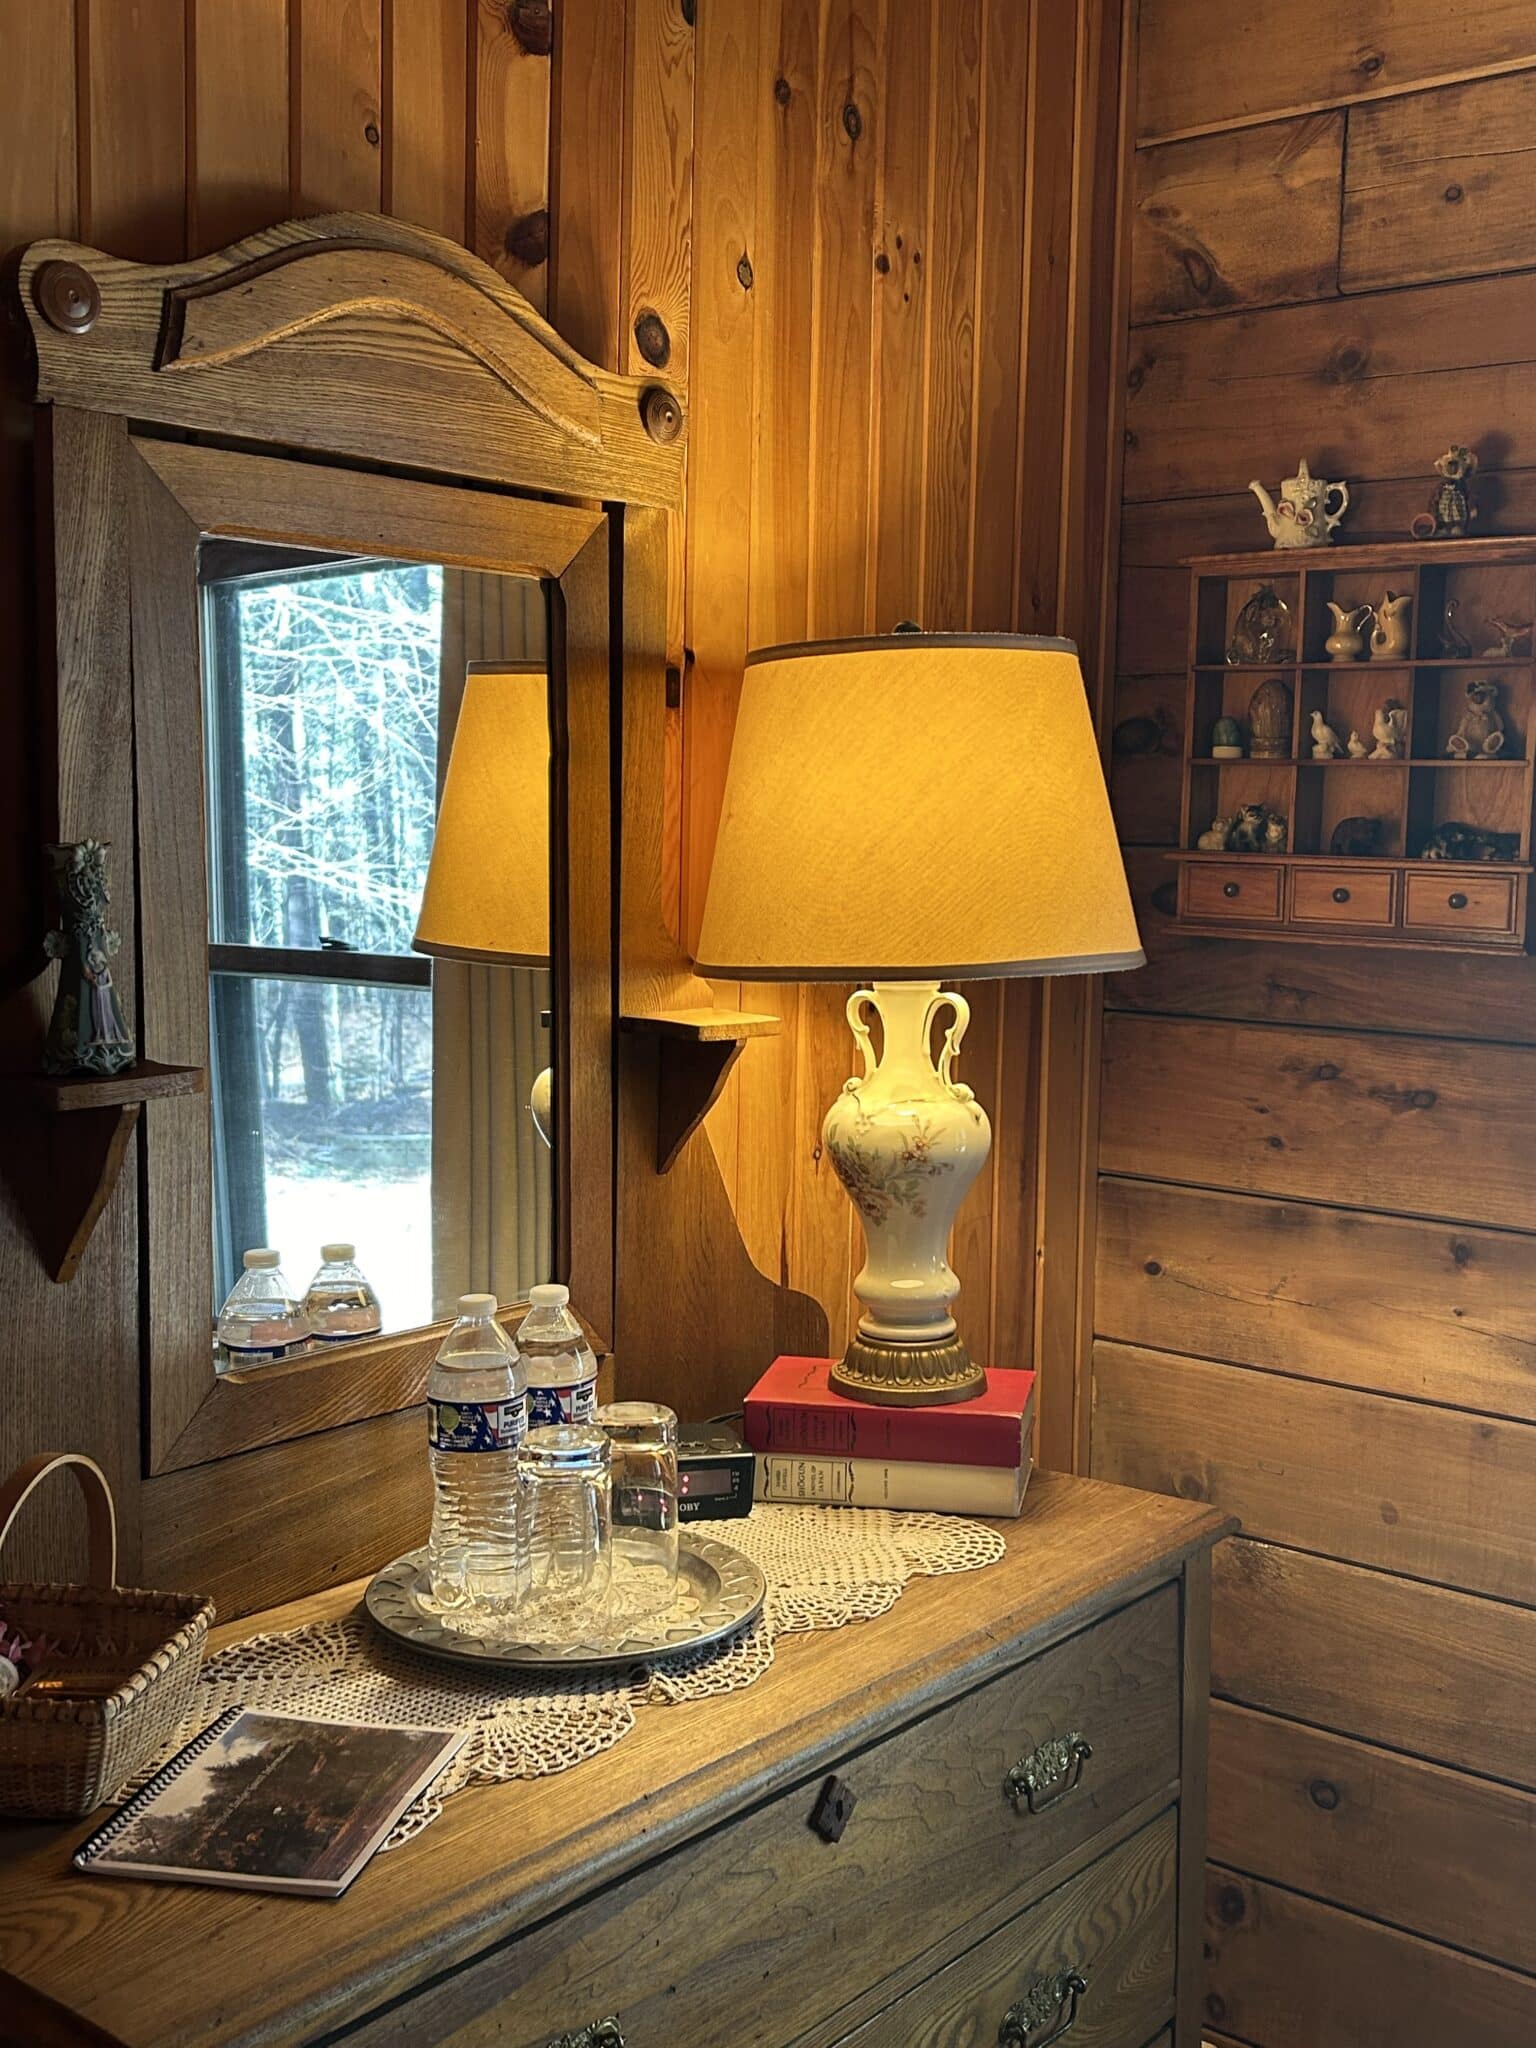 The Monument dresser with a lamp and room amenities.